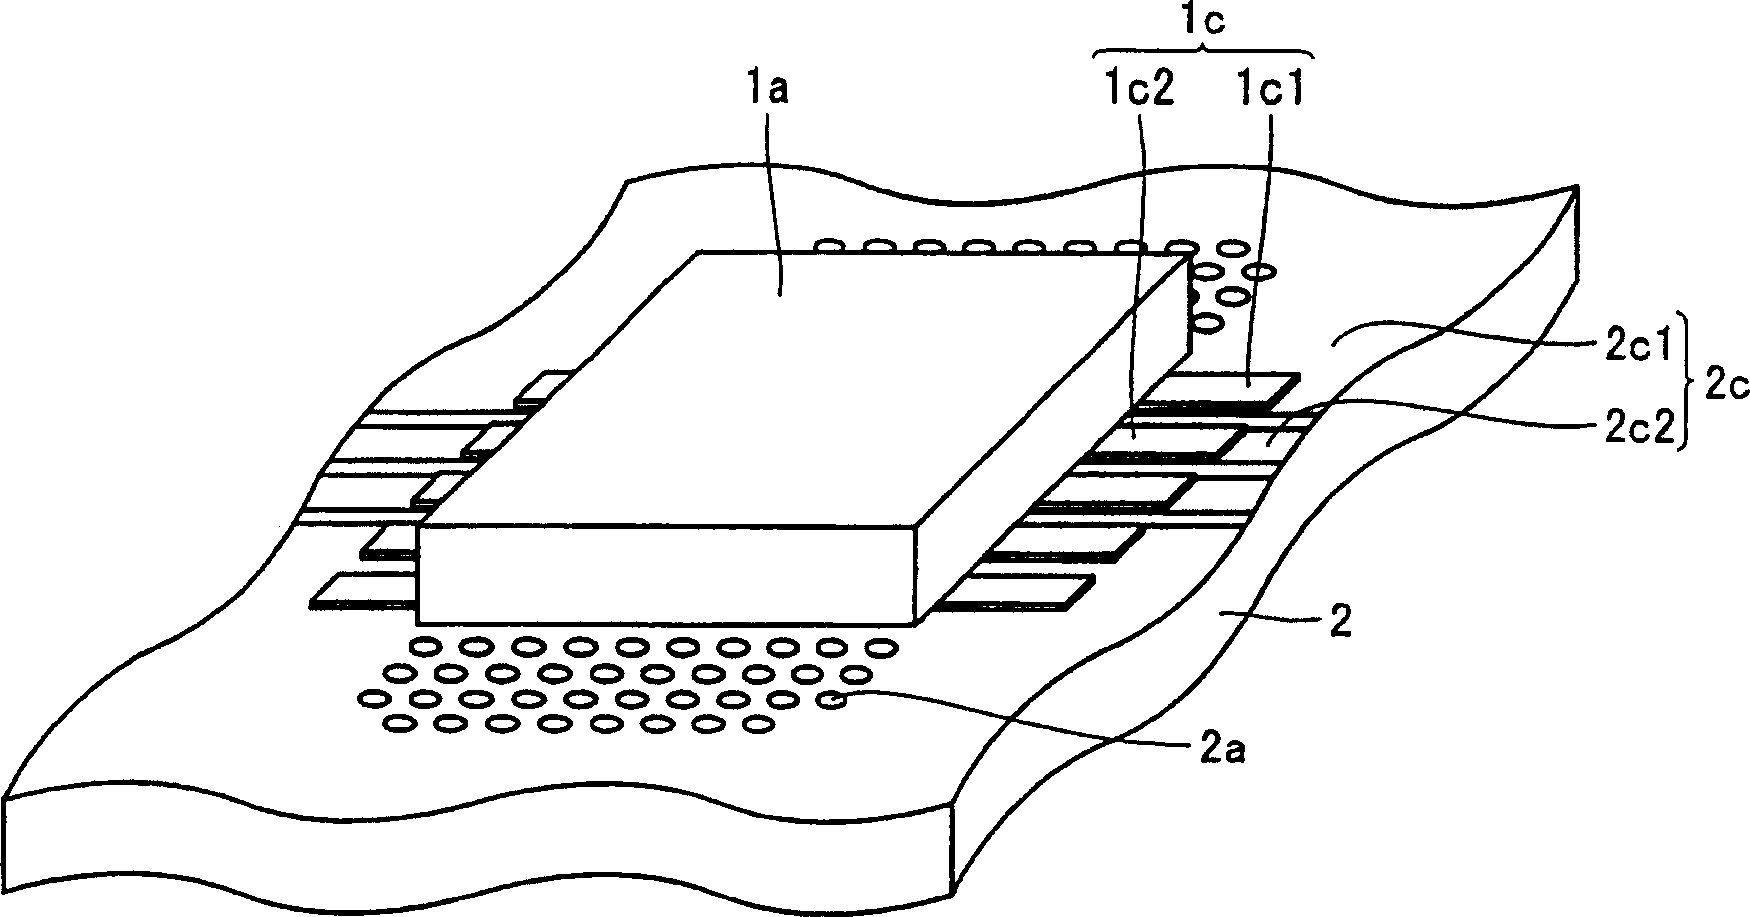 Substrate for mounting microwave chip integrated circuit and microwave communication generator and transceiver